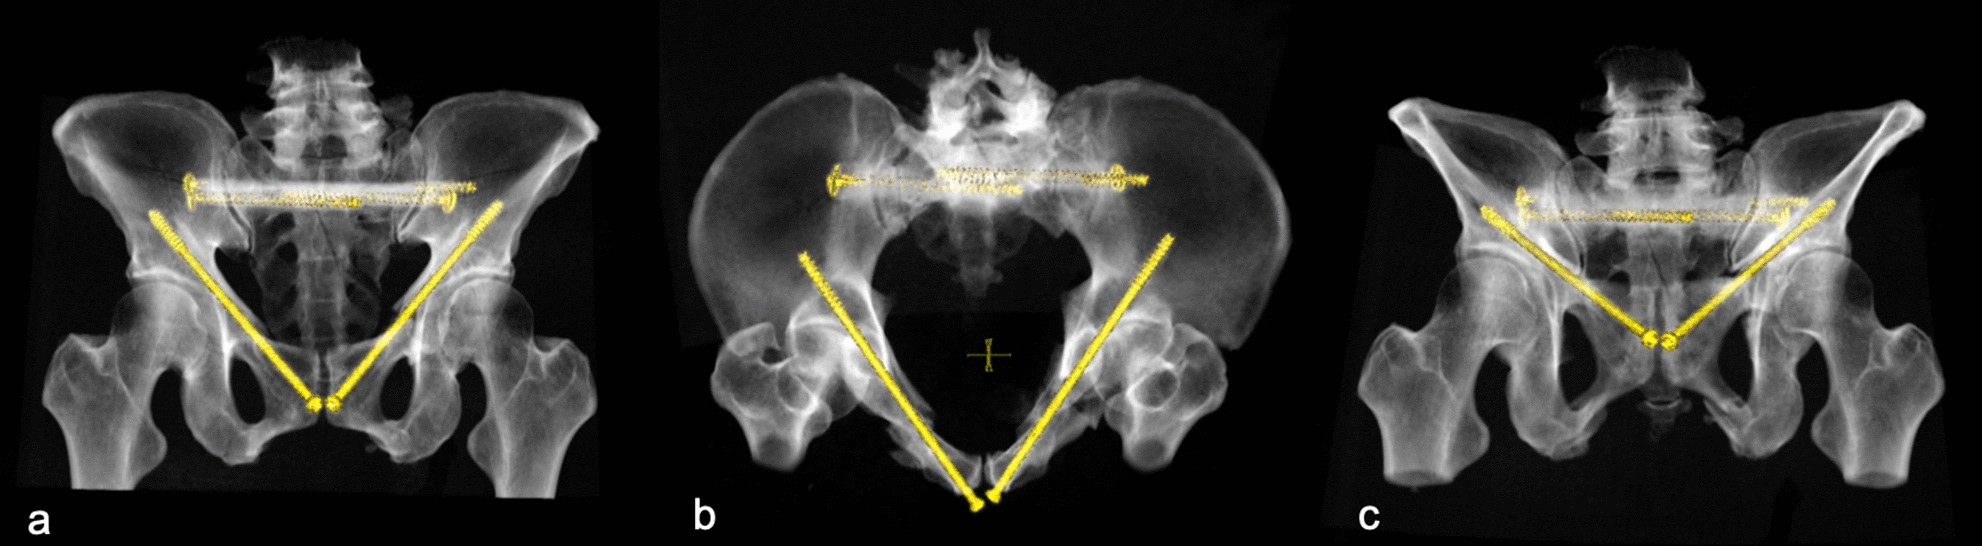 Risks and Strategies to Avoid Approach-Related Complications During  Operative Treatment of Pelvic Ring or Acetabular Fractures R